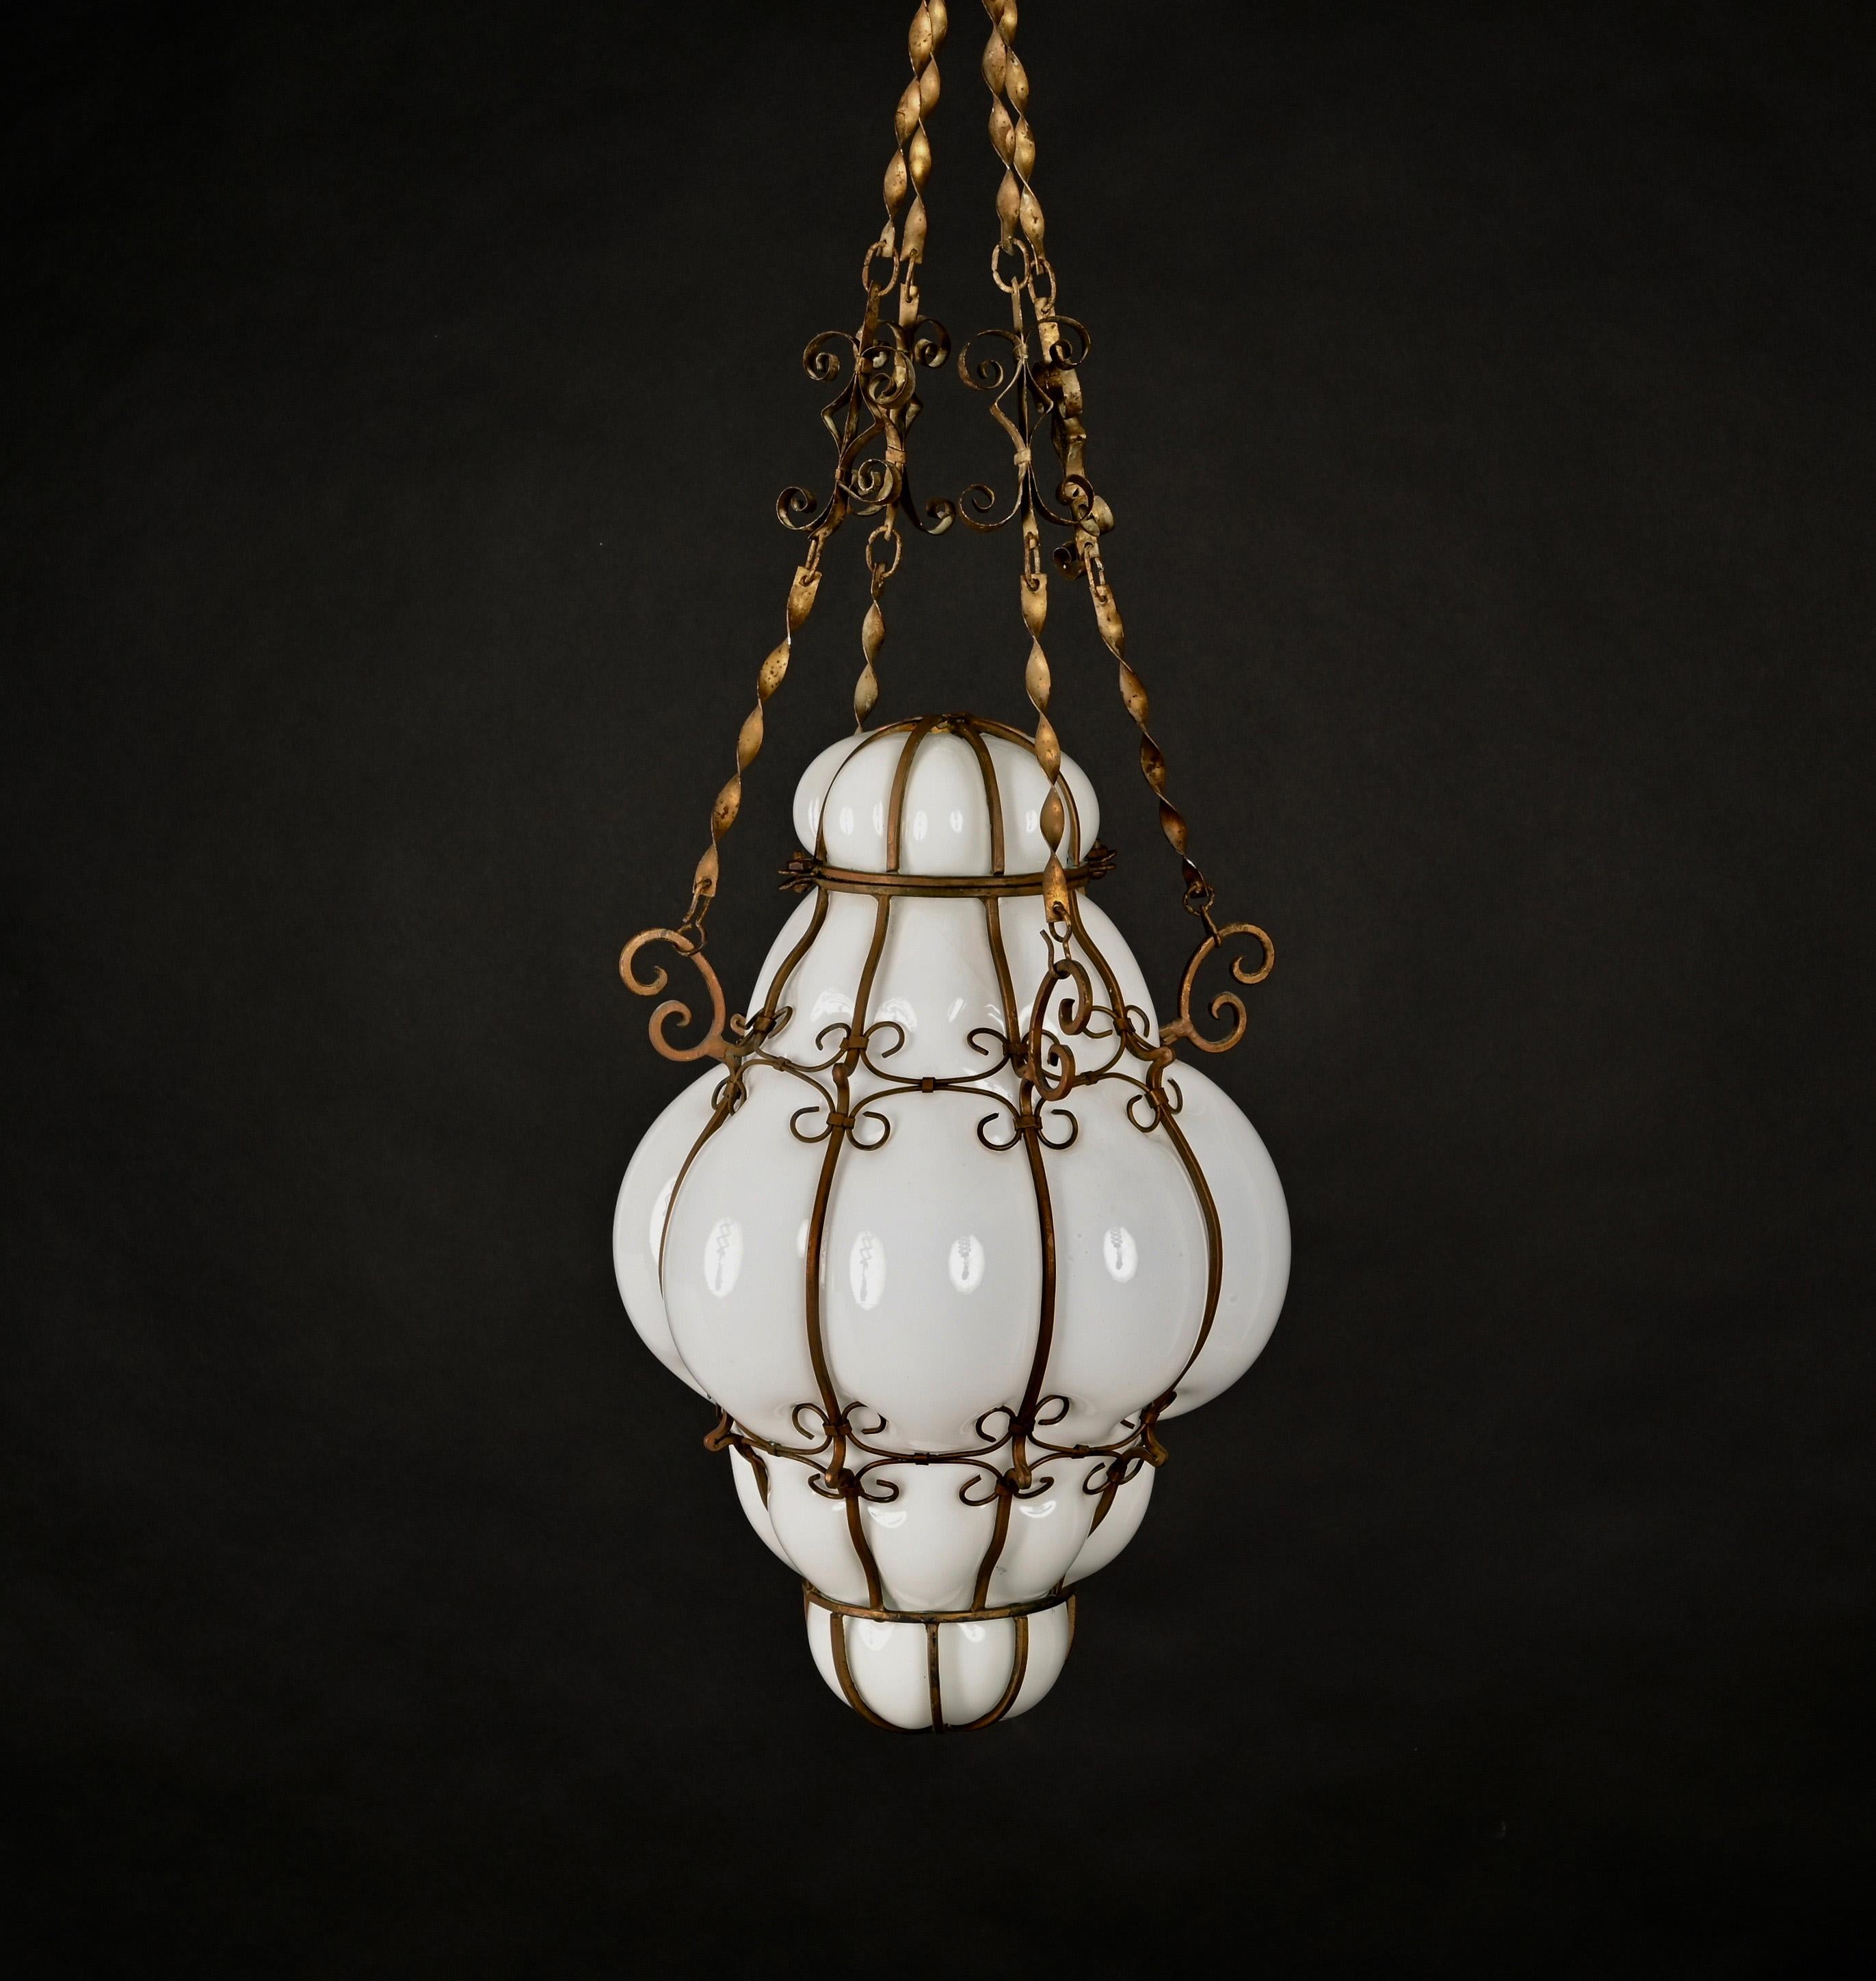 Midcentury Venetian Brass and Mouth Blown Murano White Glass Chandelier, 1940s For Sale 6